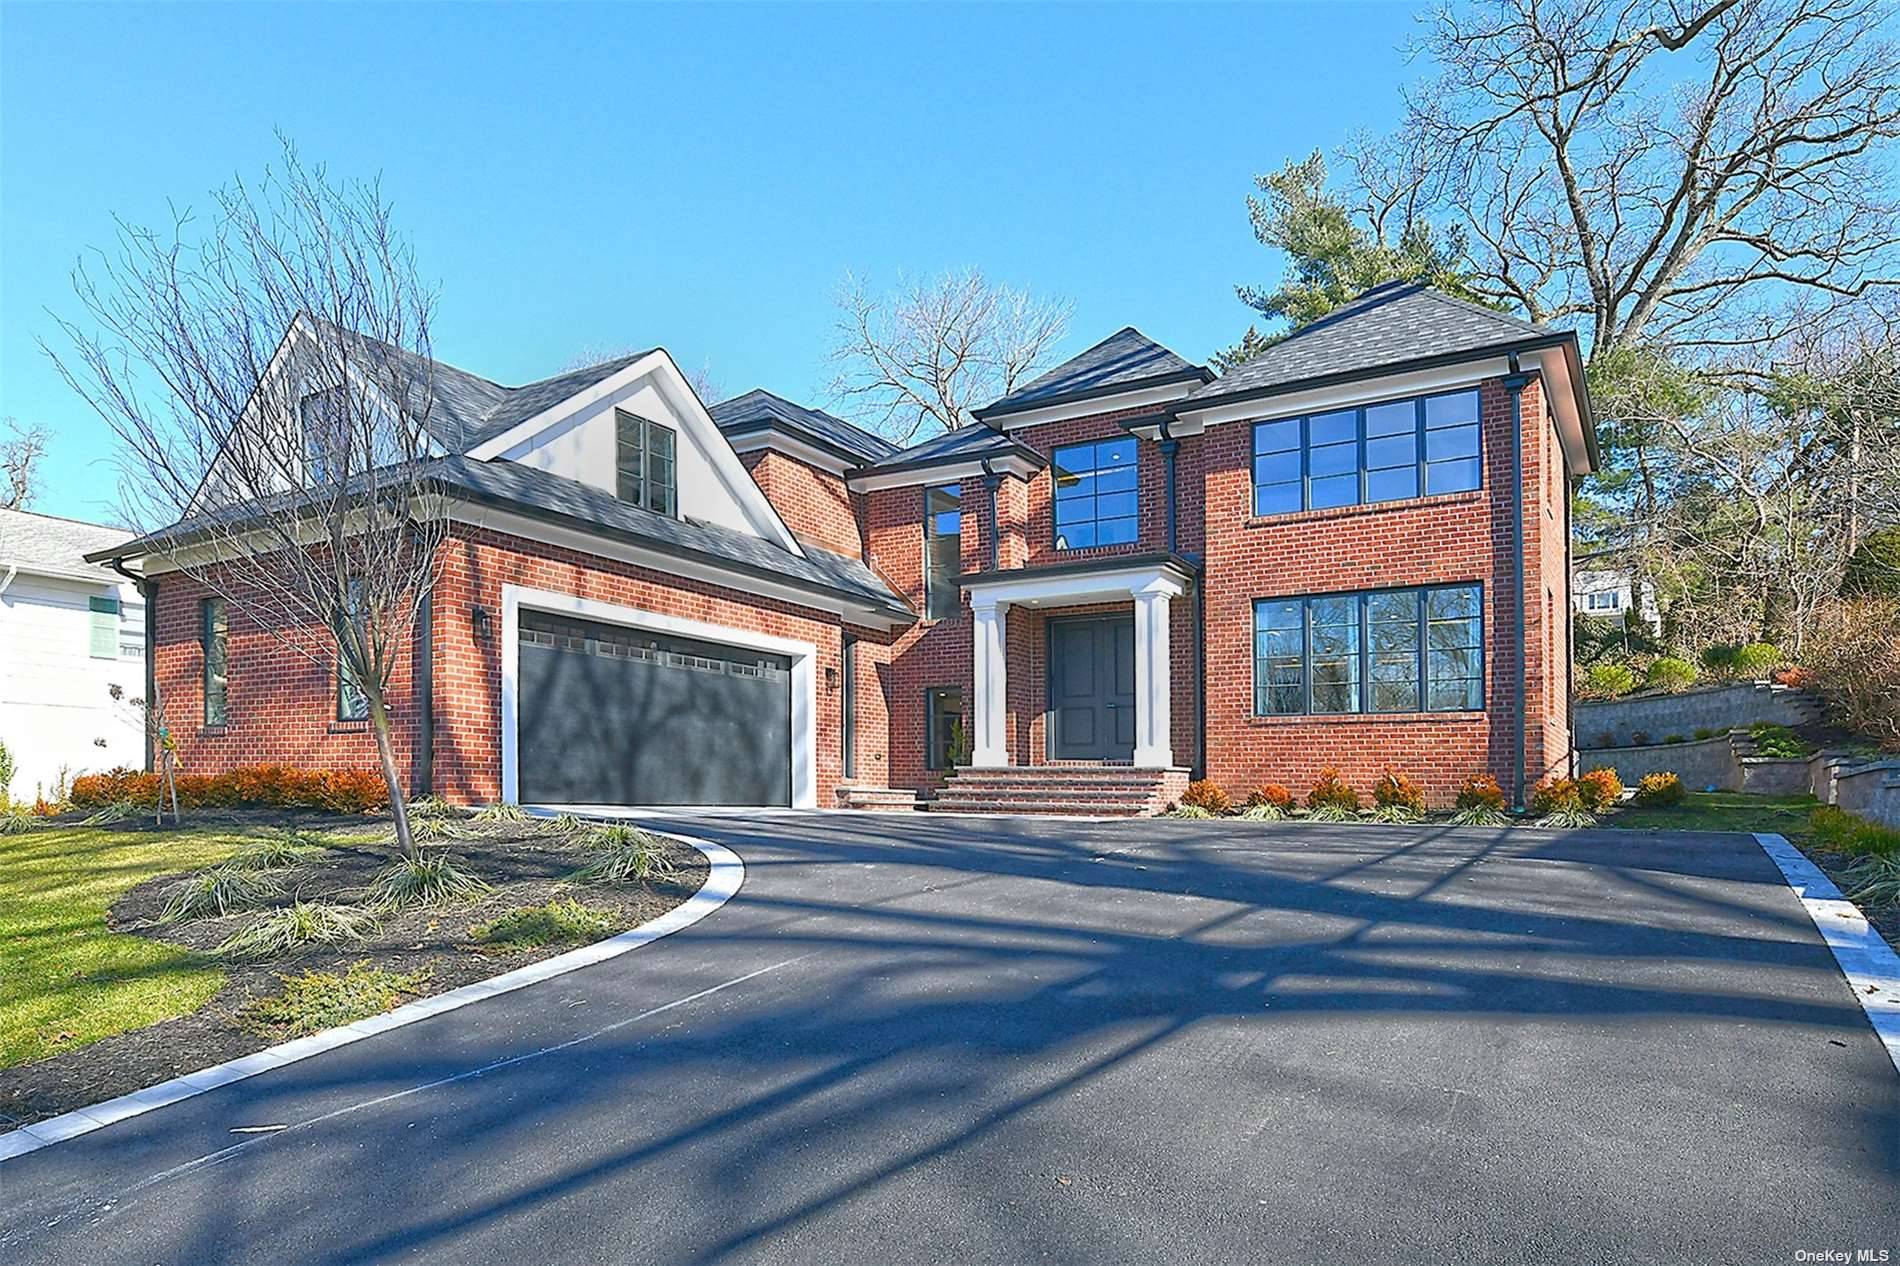 NEW CONSTRUCTION, spectacular, custom built brick colonial approx 6000 sqft of luxury workmanship which includes a 2000 sqft lower level with10ft ceilings finished with the same attention to detail as ...